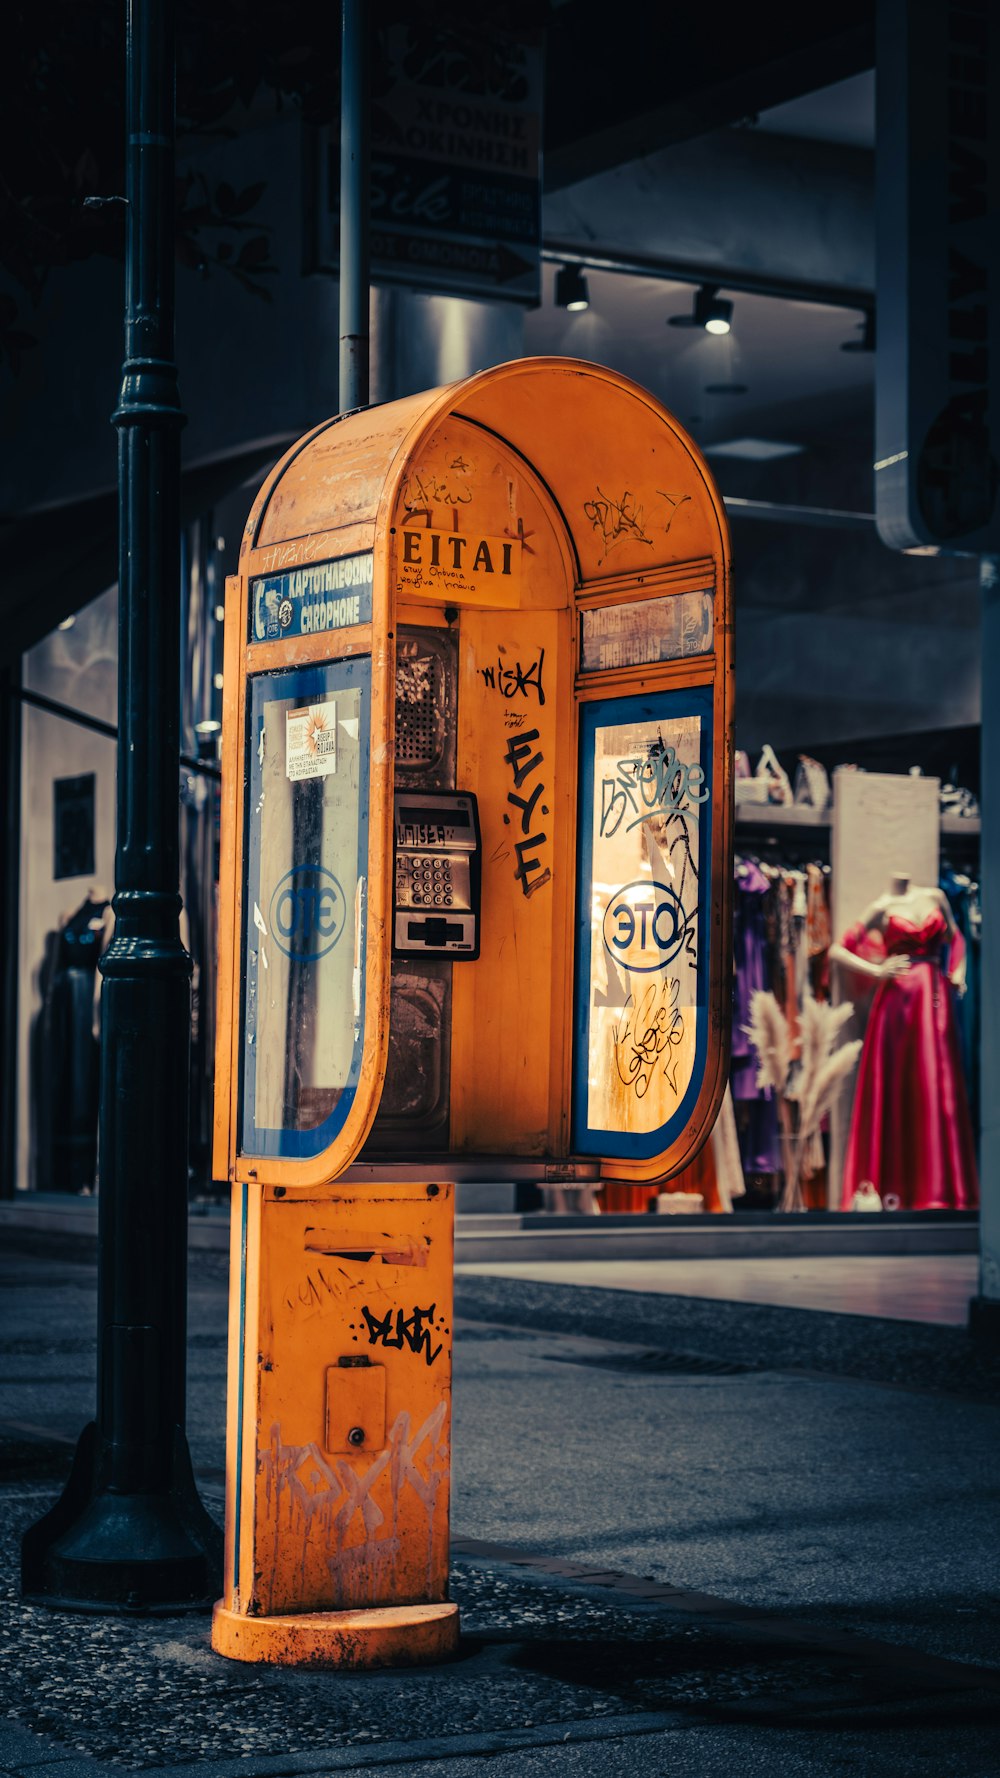 a public phone booth on a city street